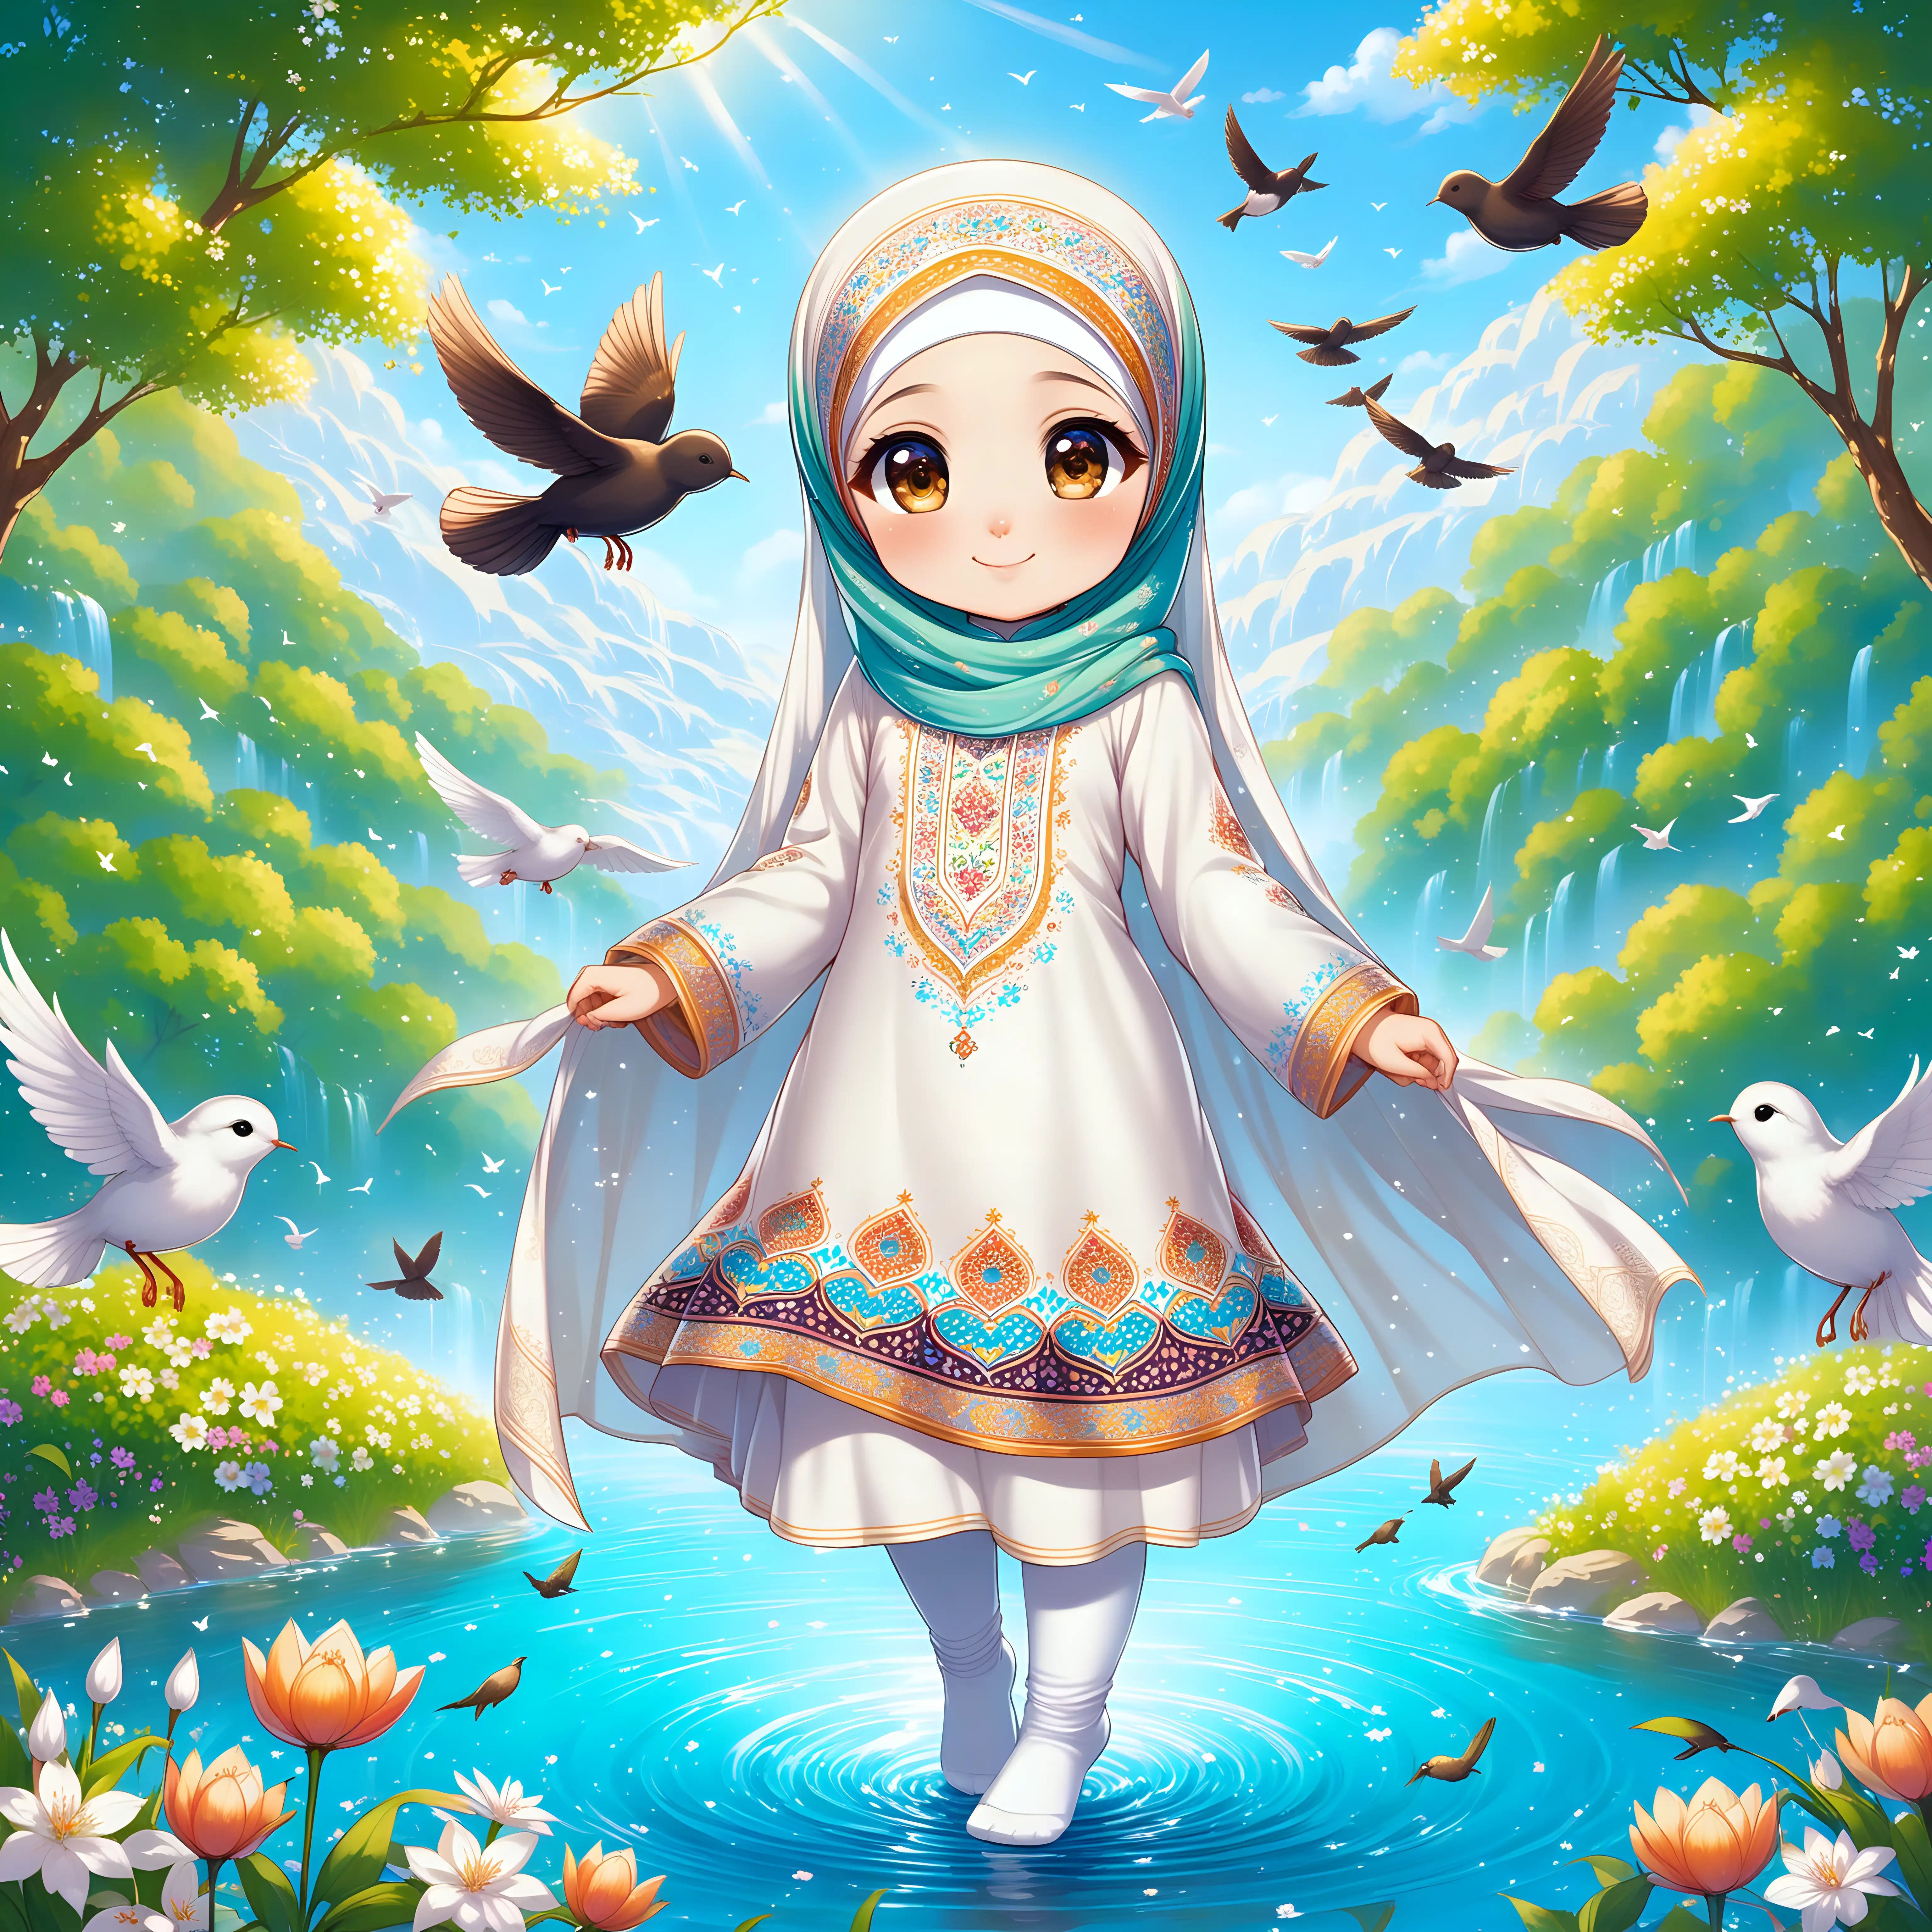 Character Persian little girl(full height, Muslim, with emphasis no hair out of veil(Hijab), smaller eyes, bigger nose, white skin, cute, smiling, wearing socks, clothes full of Persian designs, heavenly girl).

Atmosphere flowing water from the spring with flowers, nightingales and flying birds in spring.